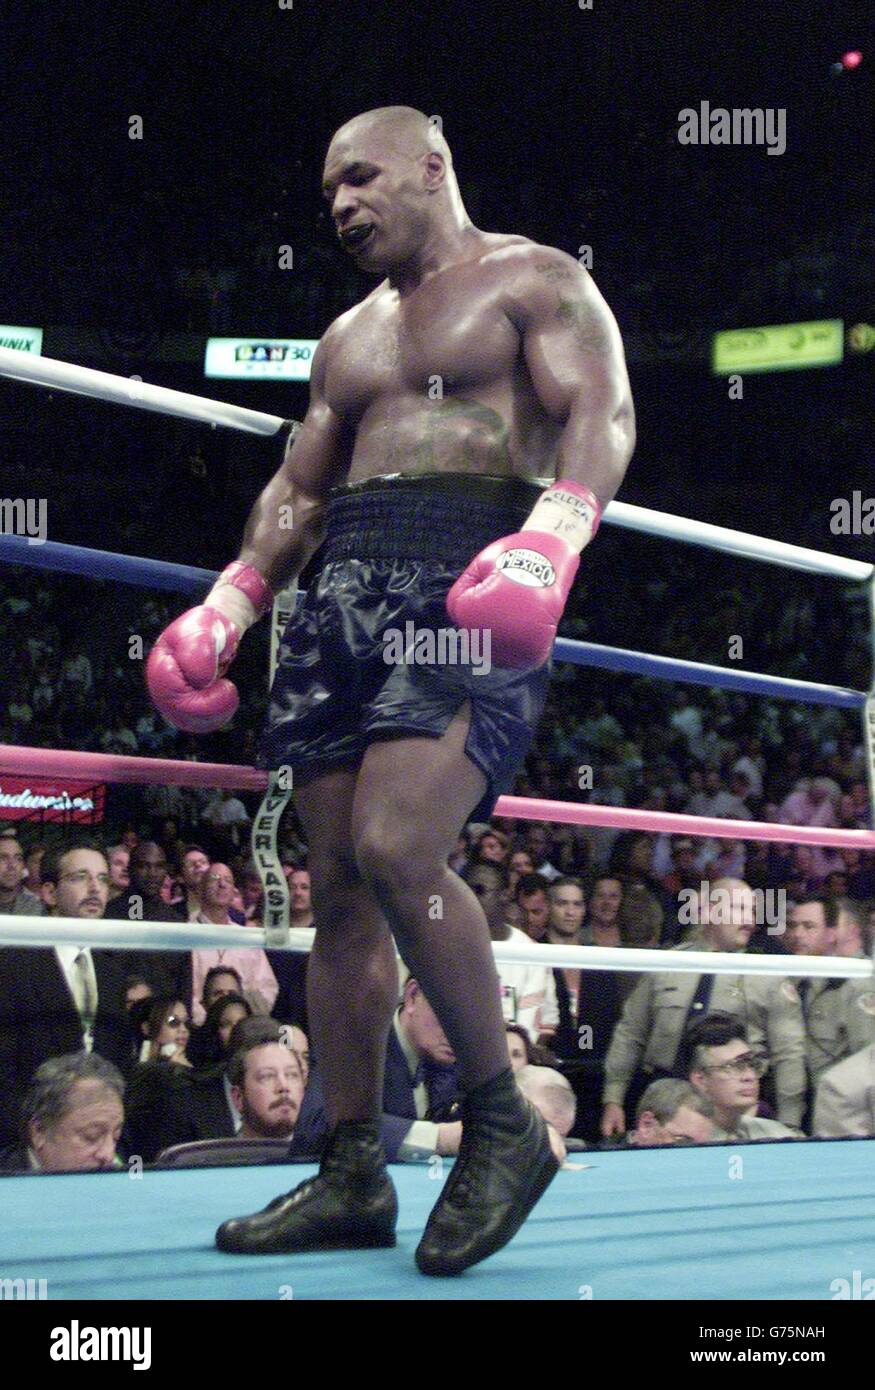 Dejected challenger Mike Tyson walks slowly back to his corner between rounds in the fight against the Heavyweight Champion Lennox Lewis at the Pyramid Arena, Memphis. Stock Photo